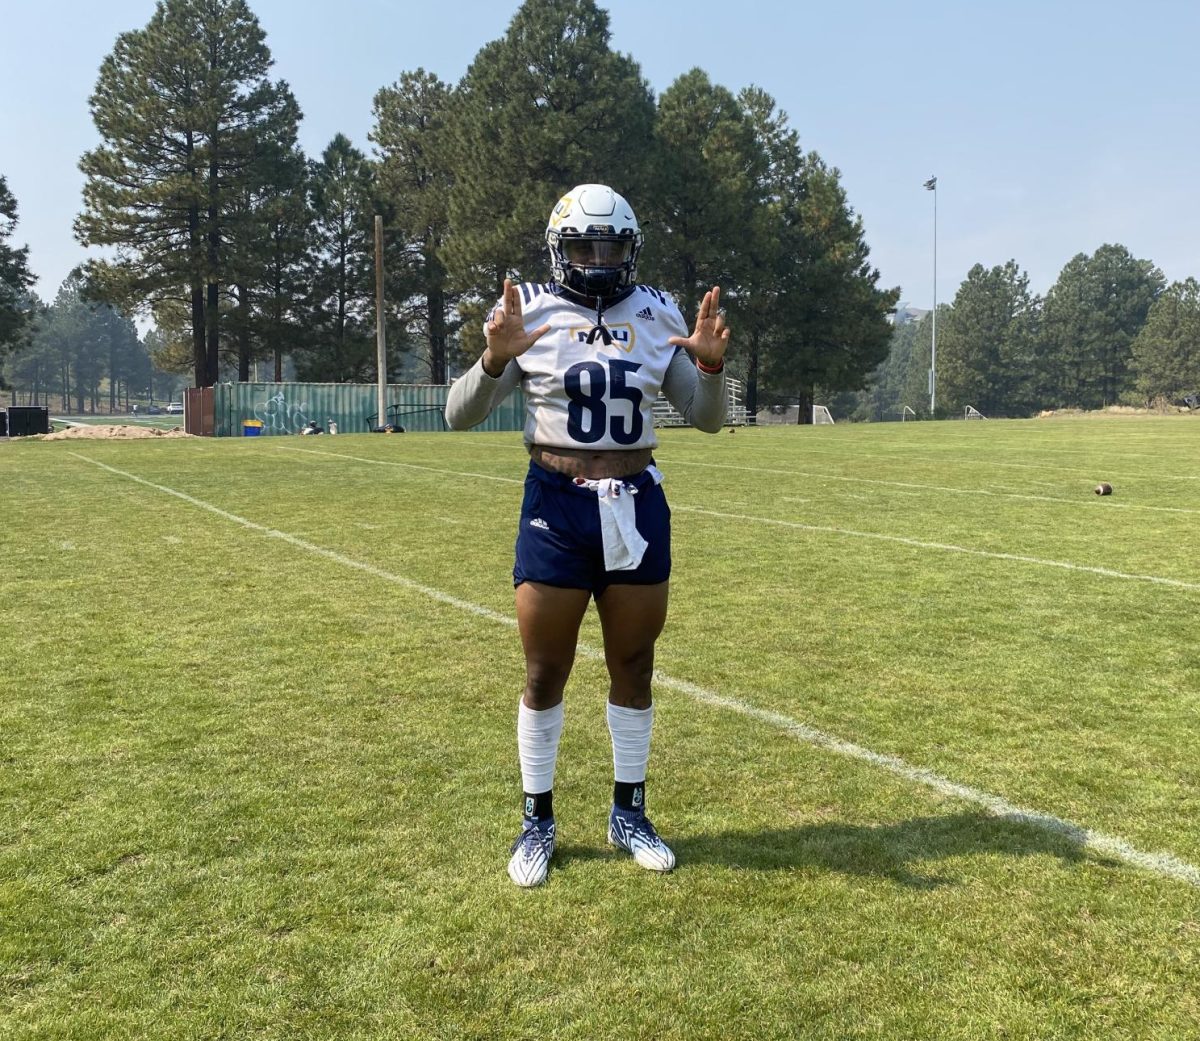 Marcus Phillips Jr. is a tight end at NAU